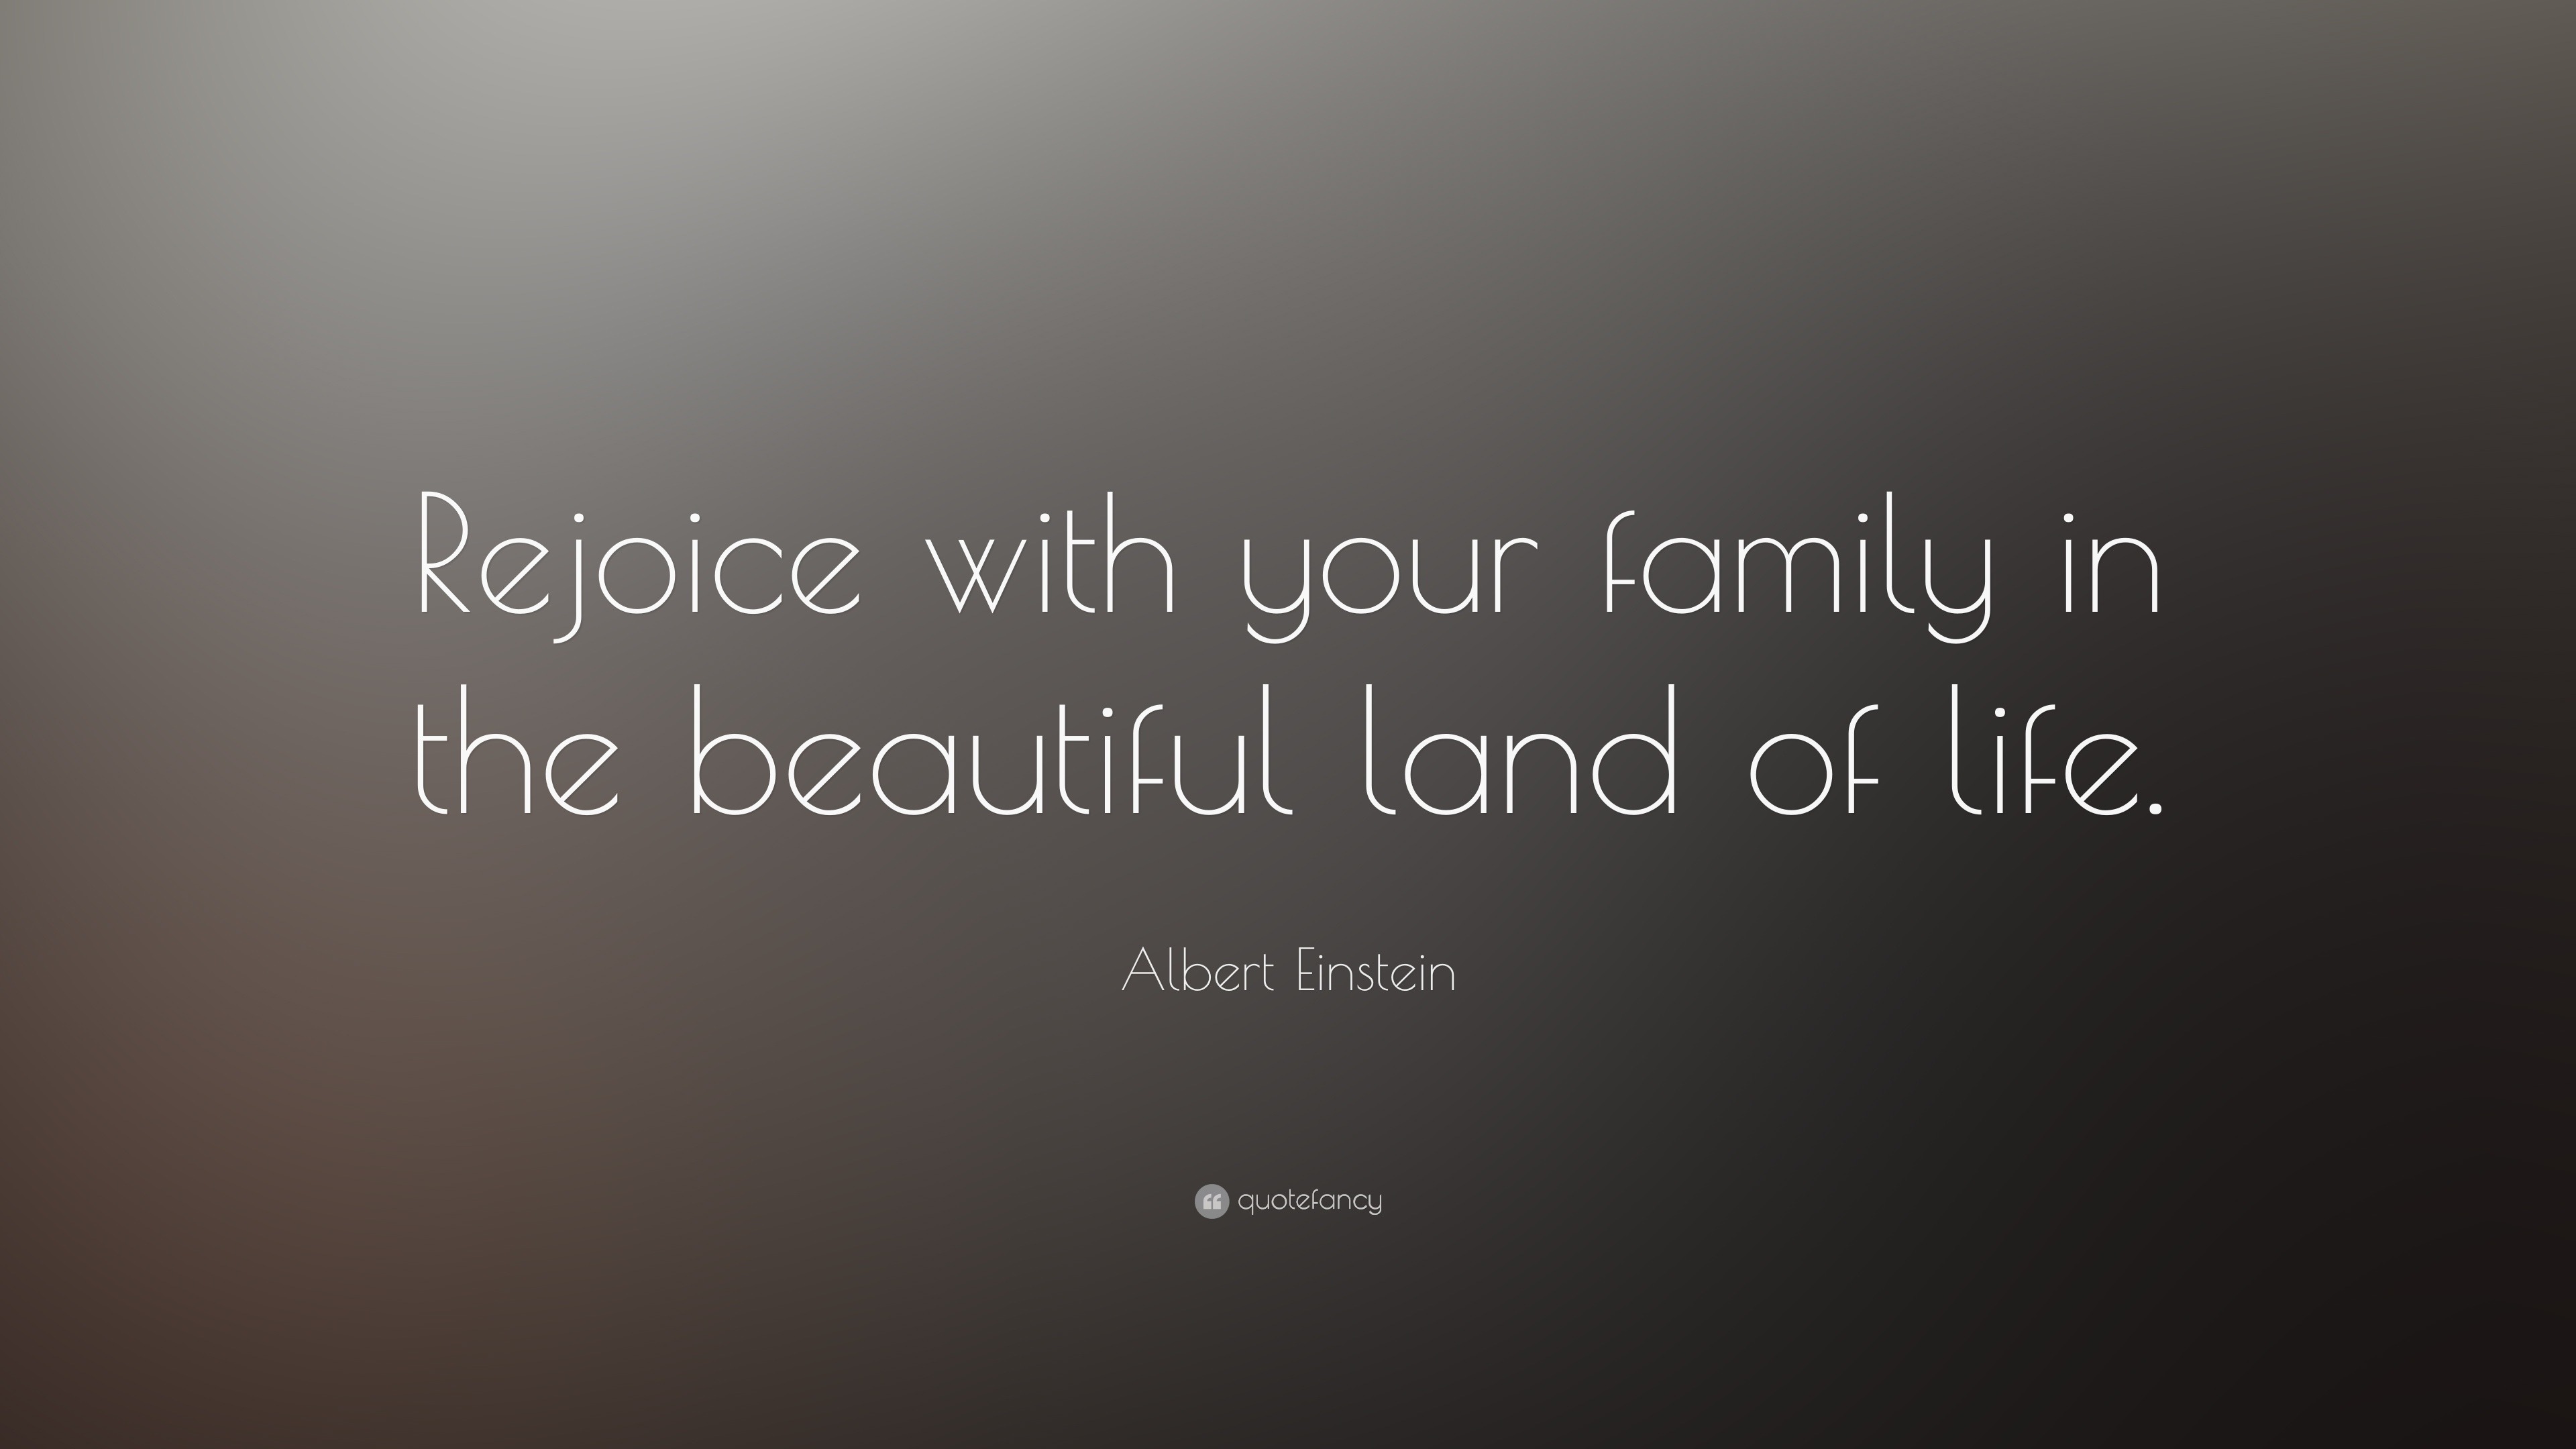 Albert Einstein Quote “Rejoice with your family in the beautiful land of life